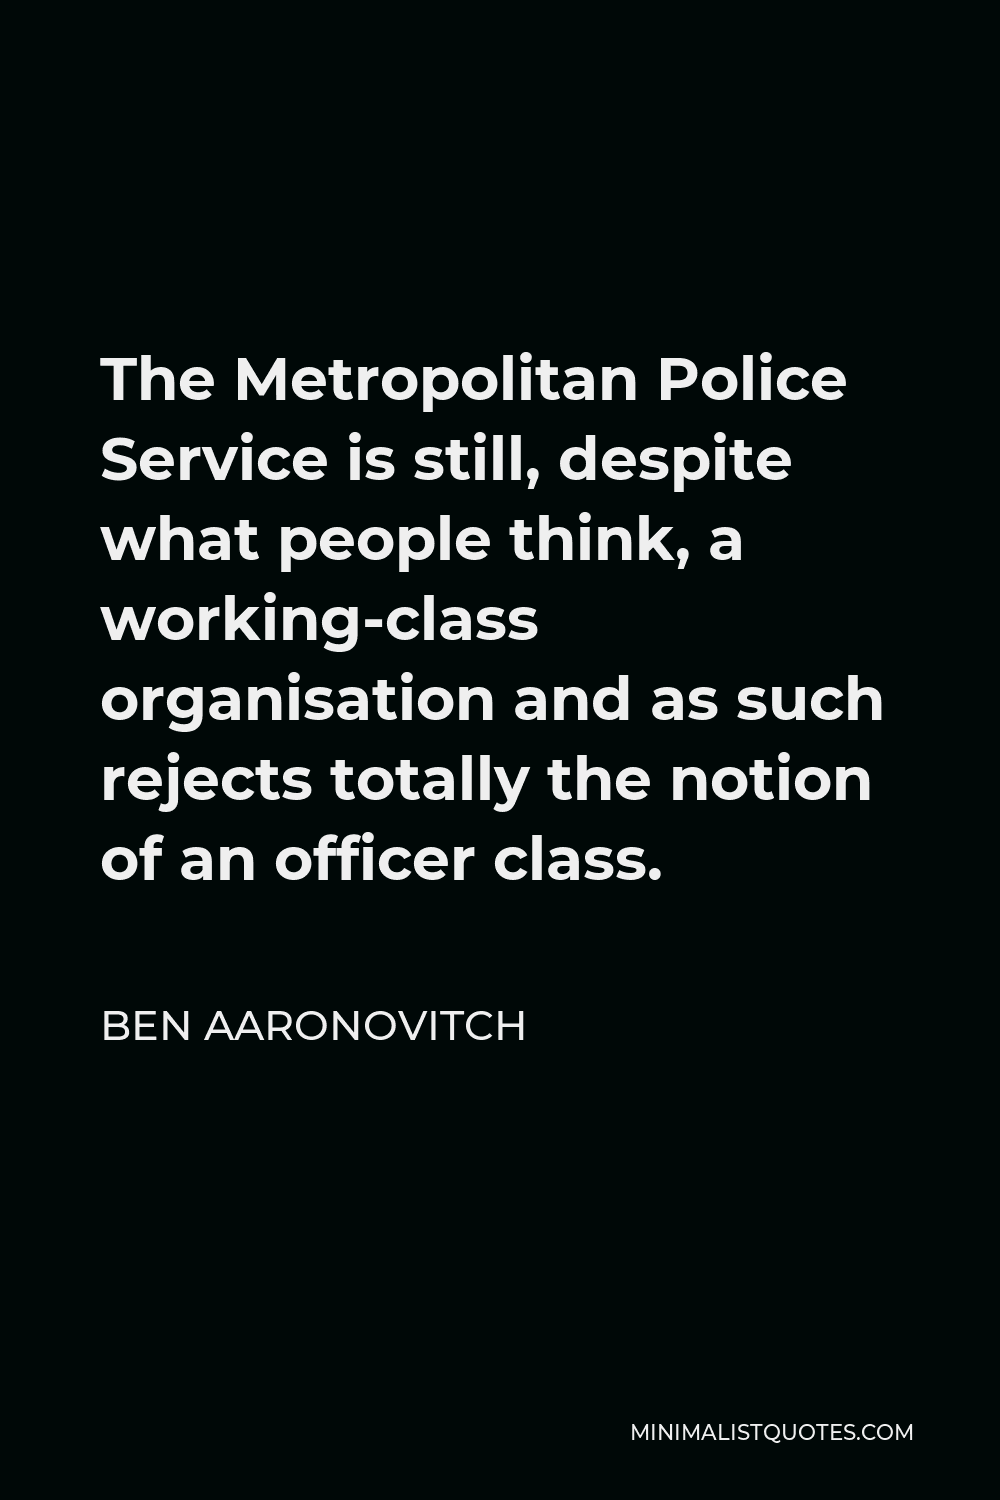 Ben Aaronovitch Quote - The Metropolitan Police Service is still, despite what people think, a working-class organisation and as such rejects totally the notion of an officer class.